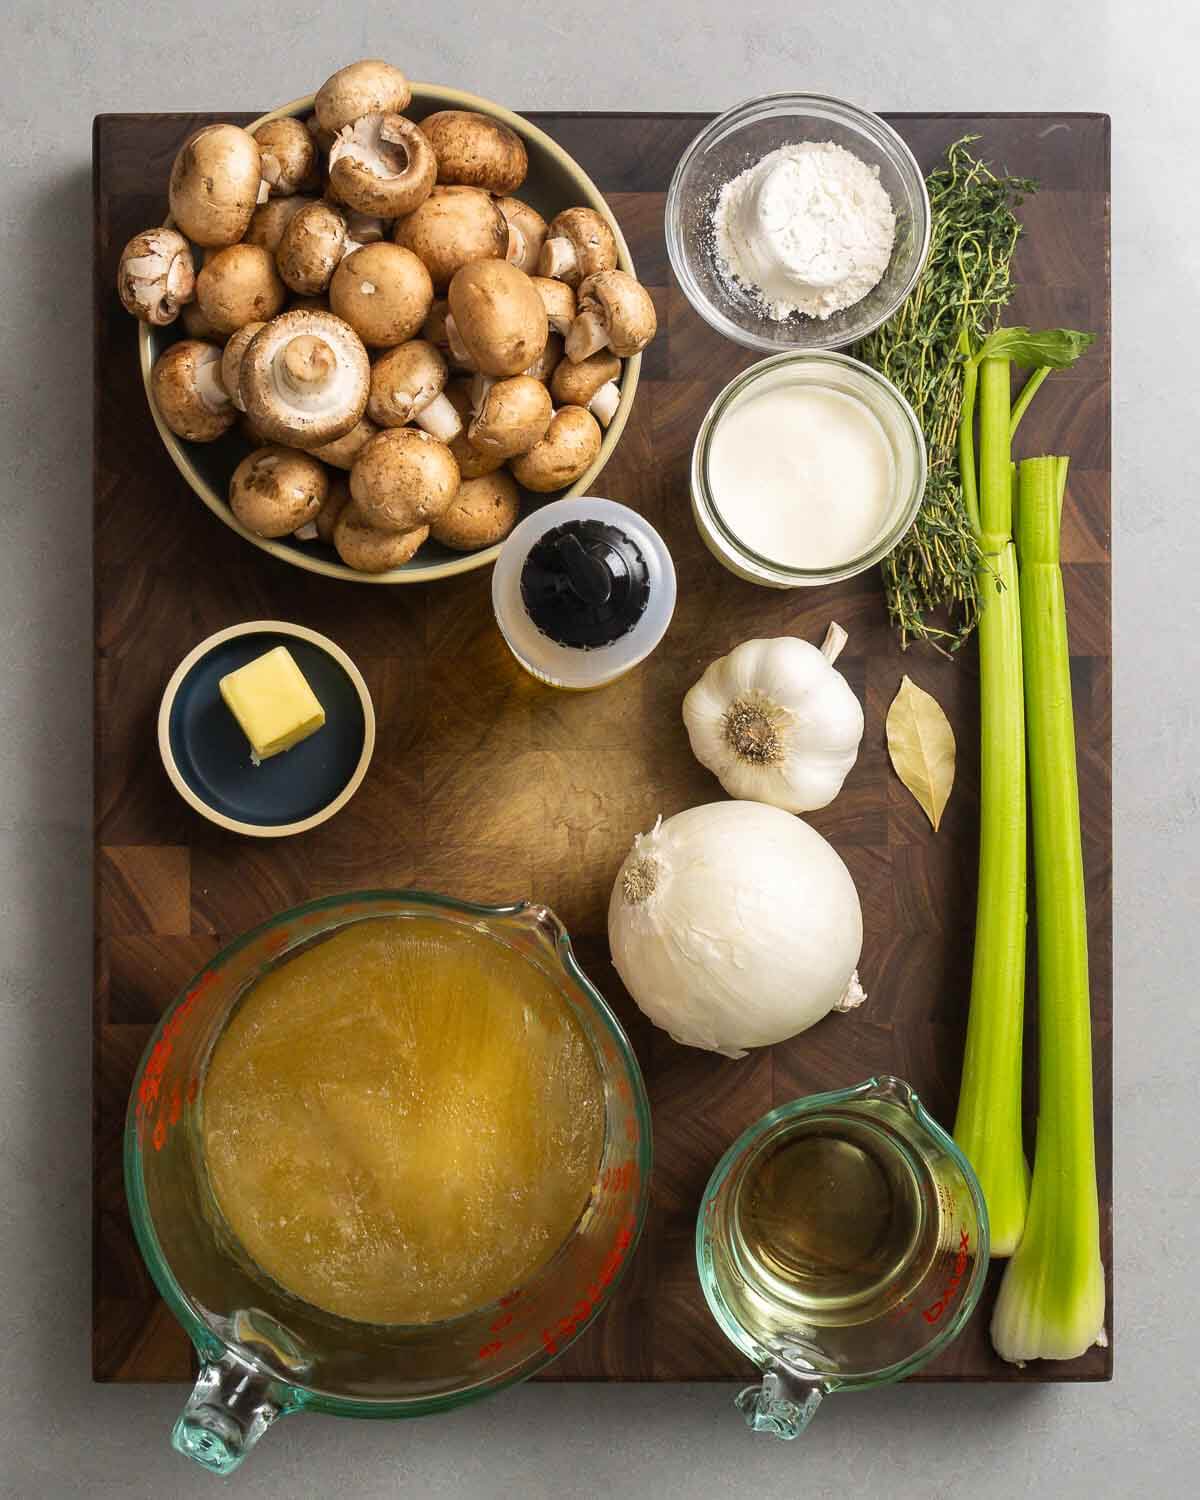 Ingredients shown: mushrooms, flour, cream, olive oil, thyme, celery, garlic, bay leaves, butter, onion, chicken stock, and white wine.